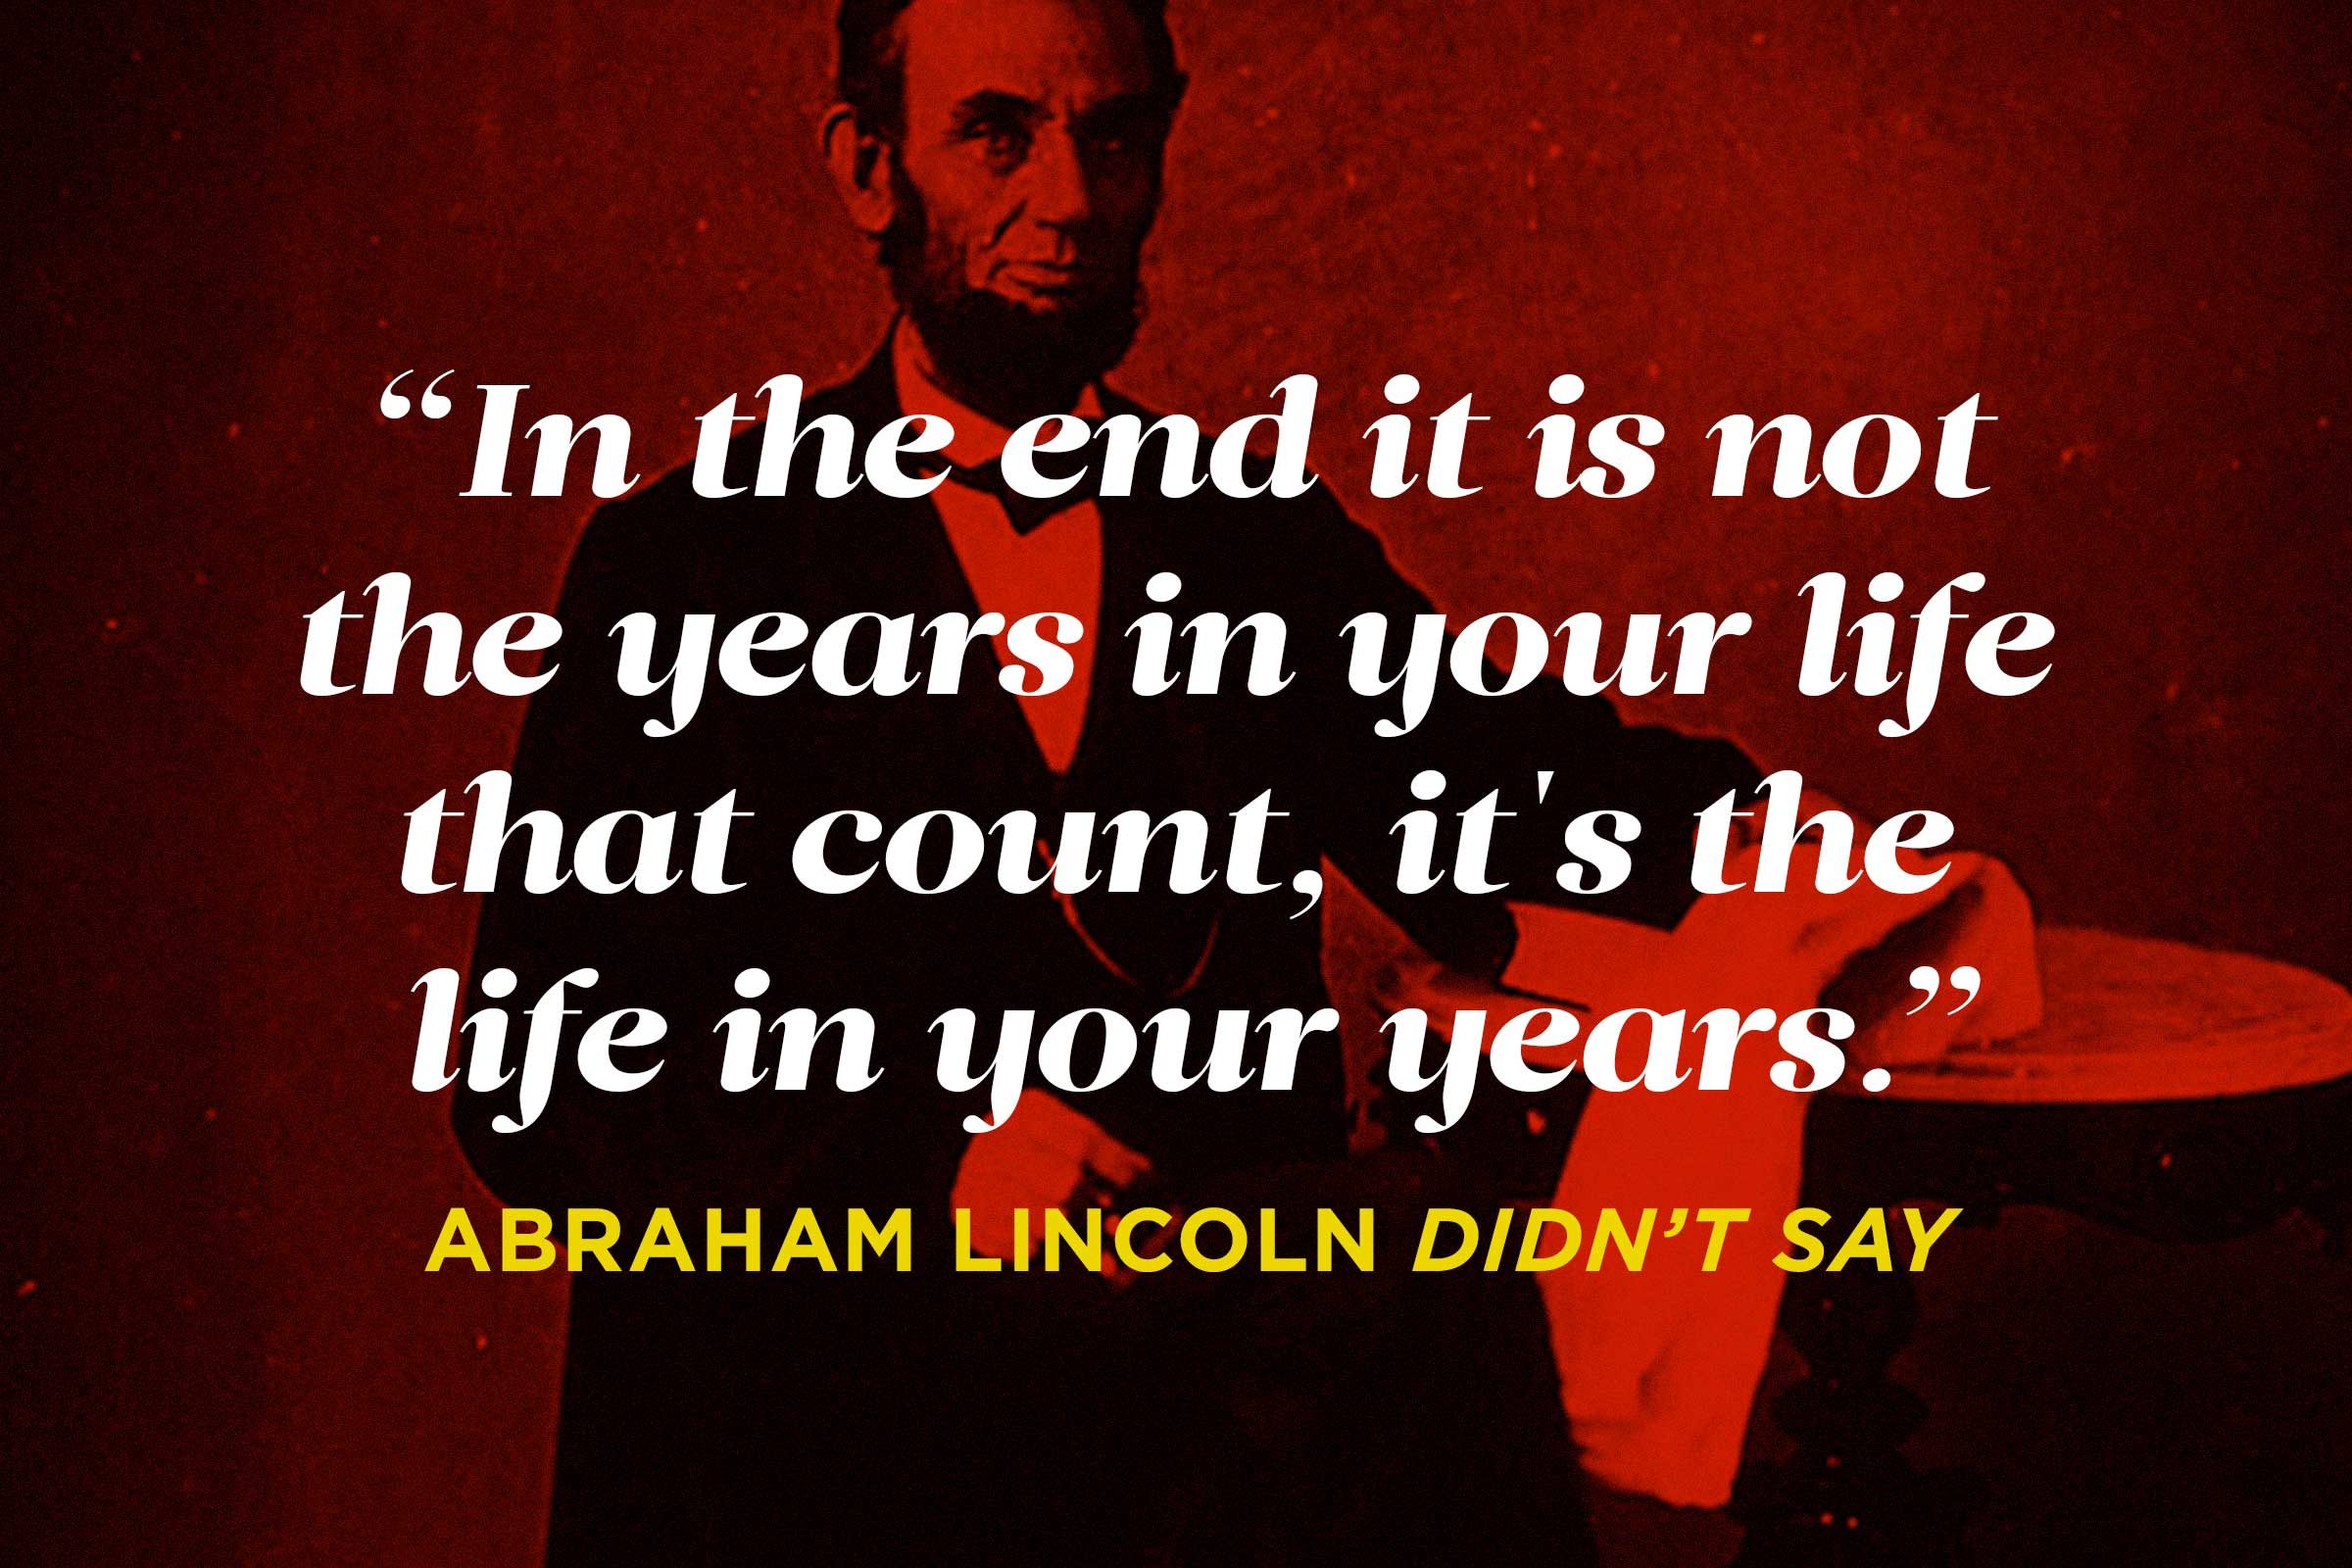 Lincoln and the life in your years